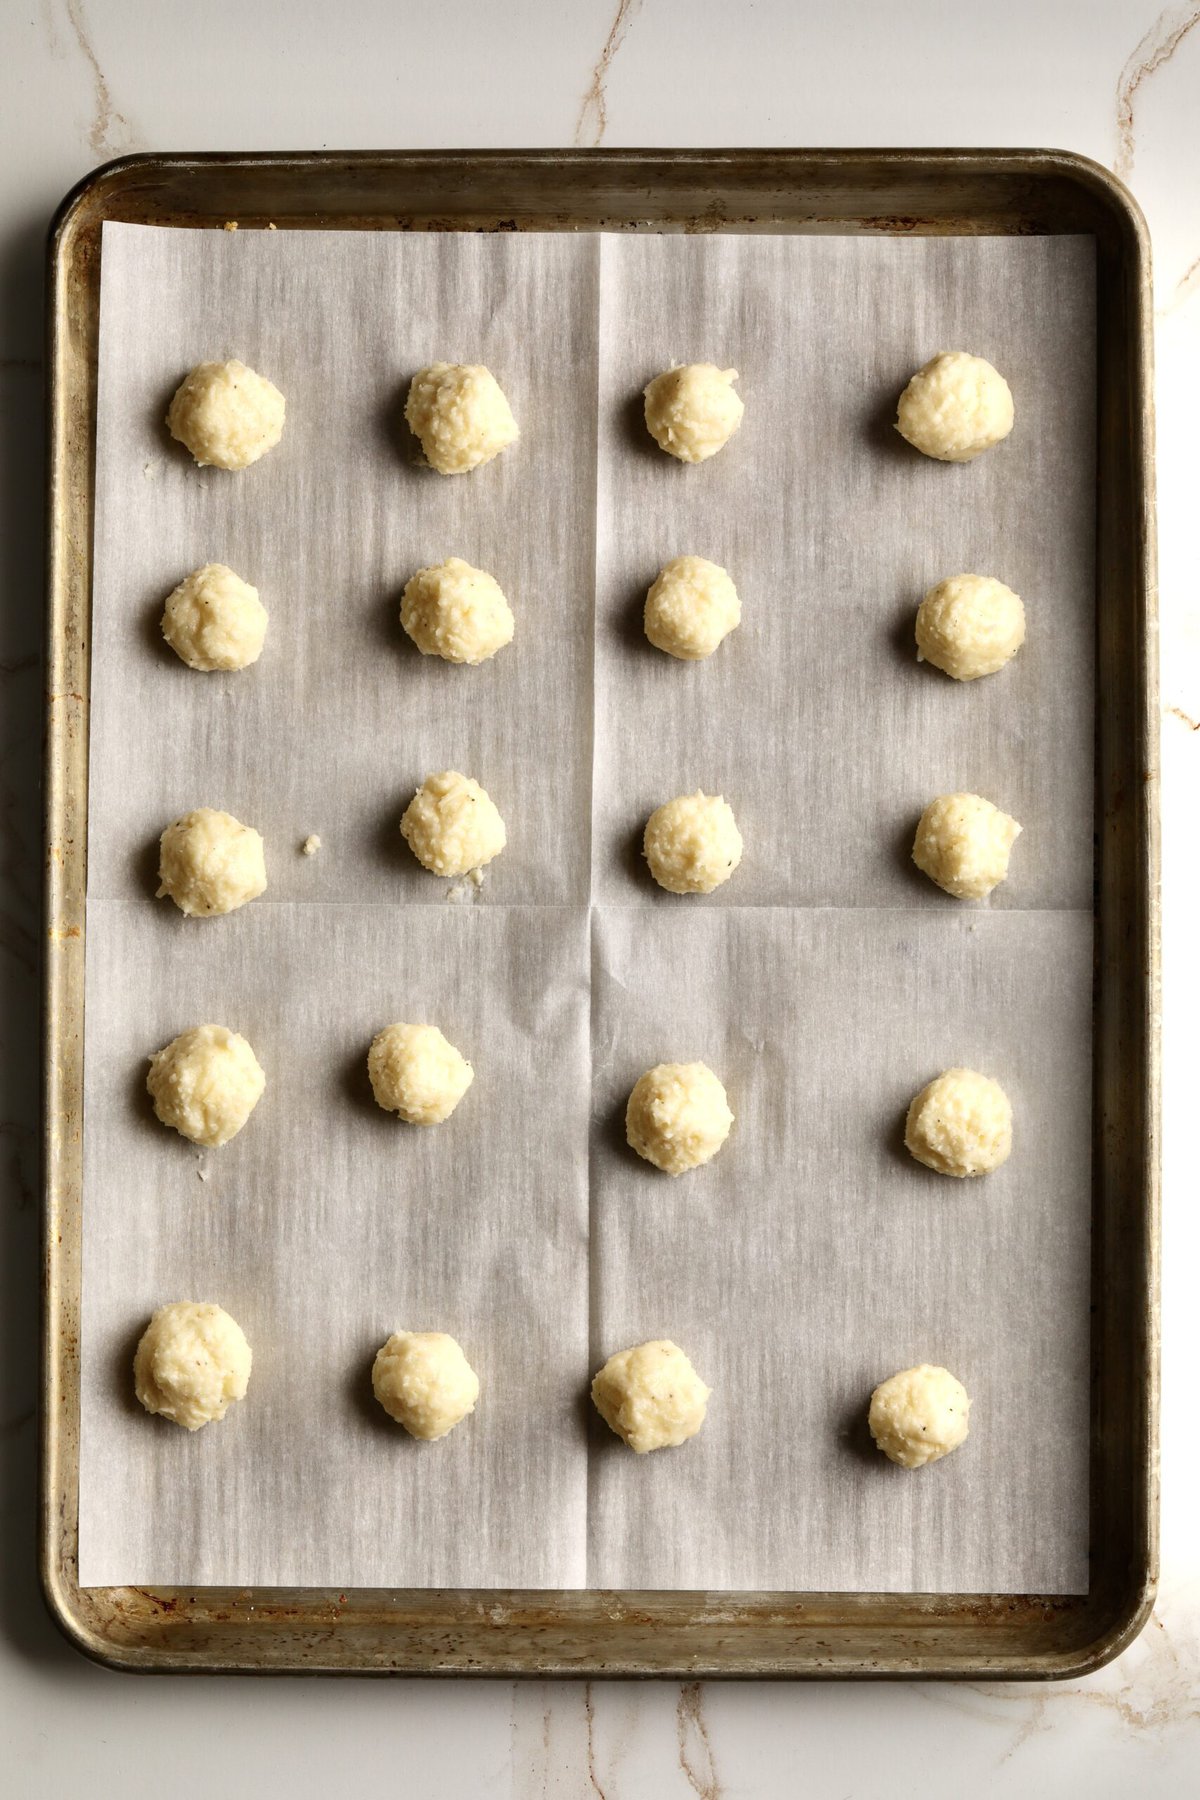 Process for making fried cheese balls- placing prepared cheese balls on parchment paper.